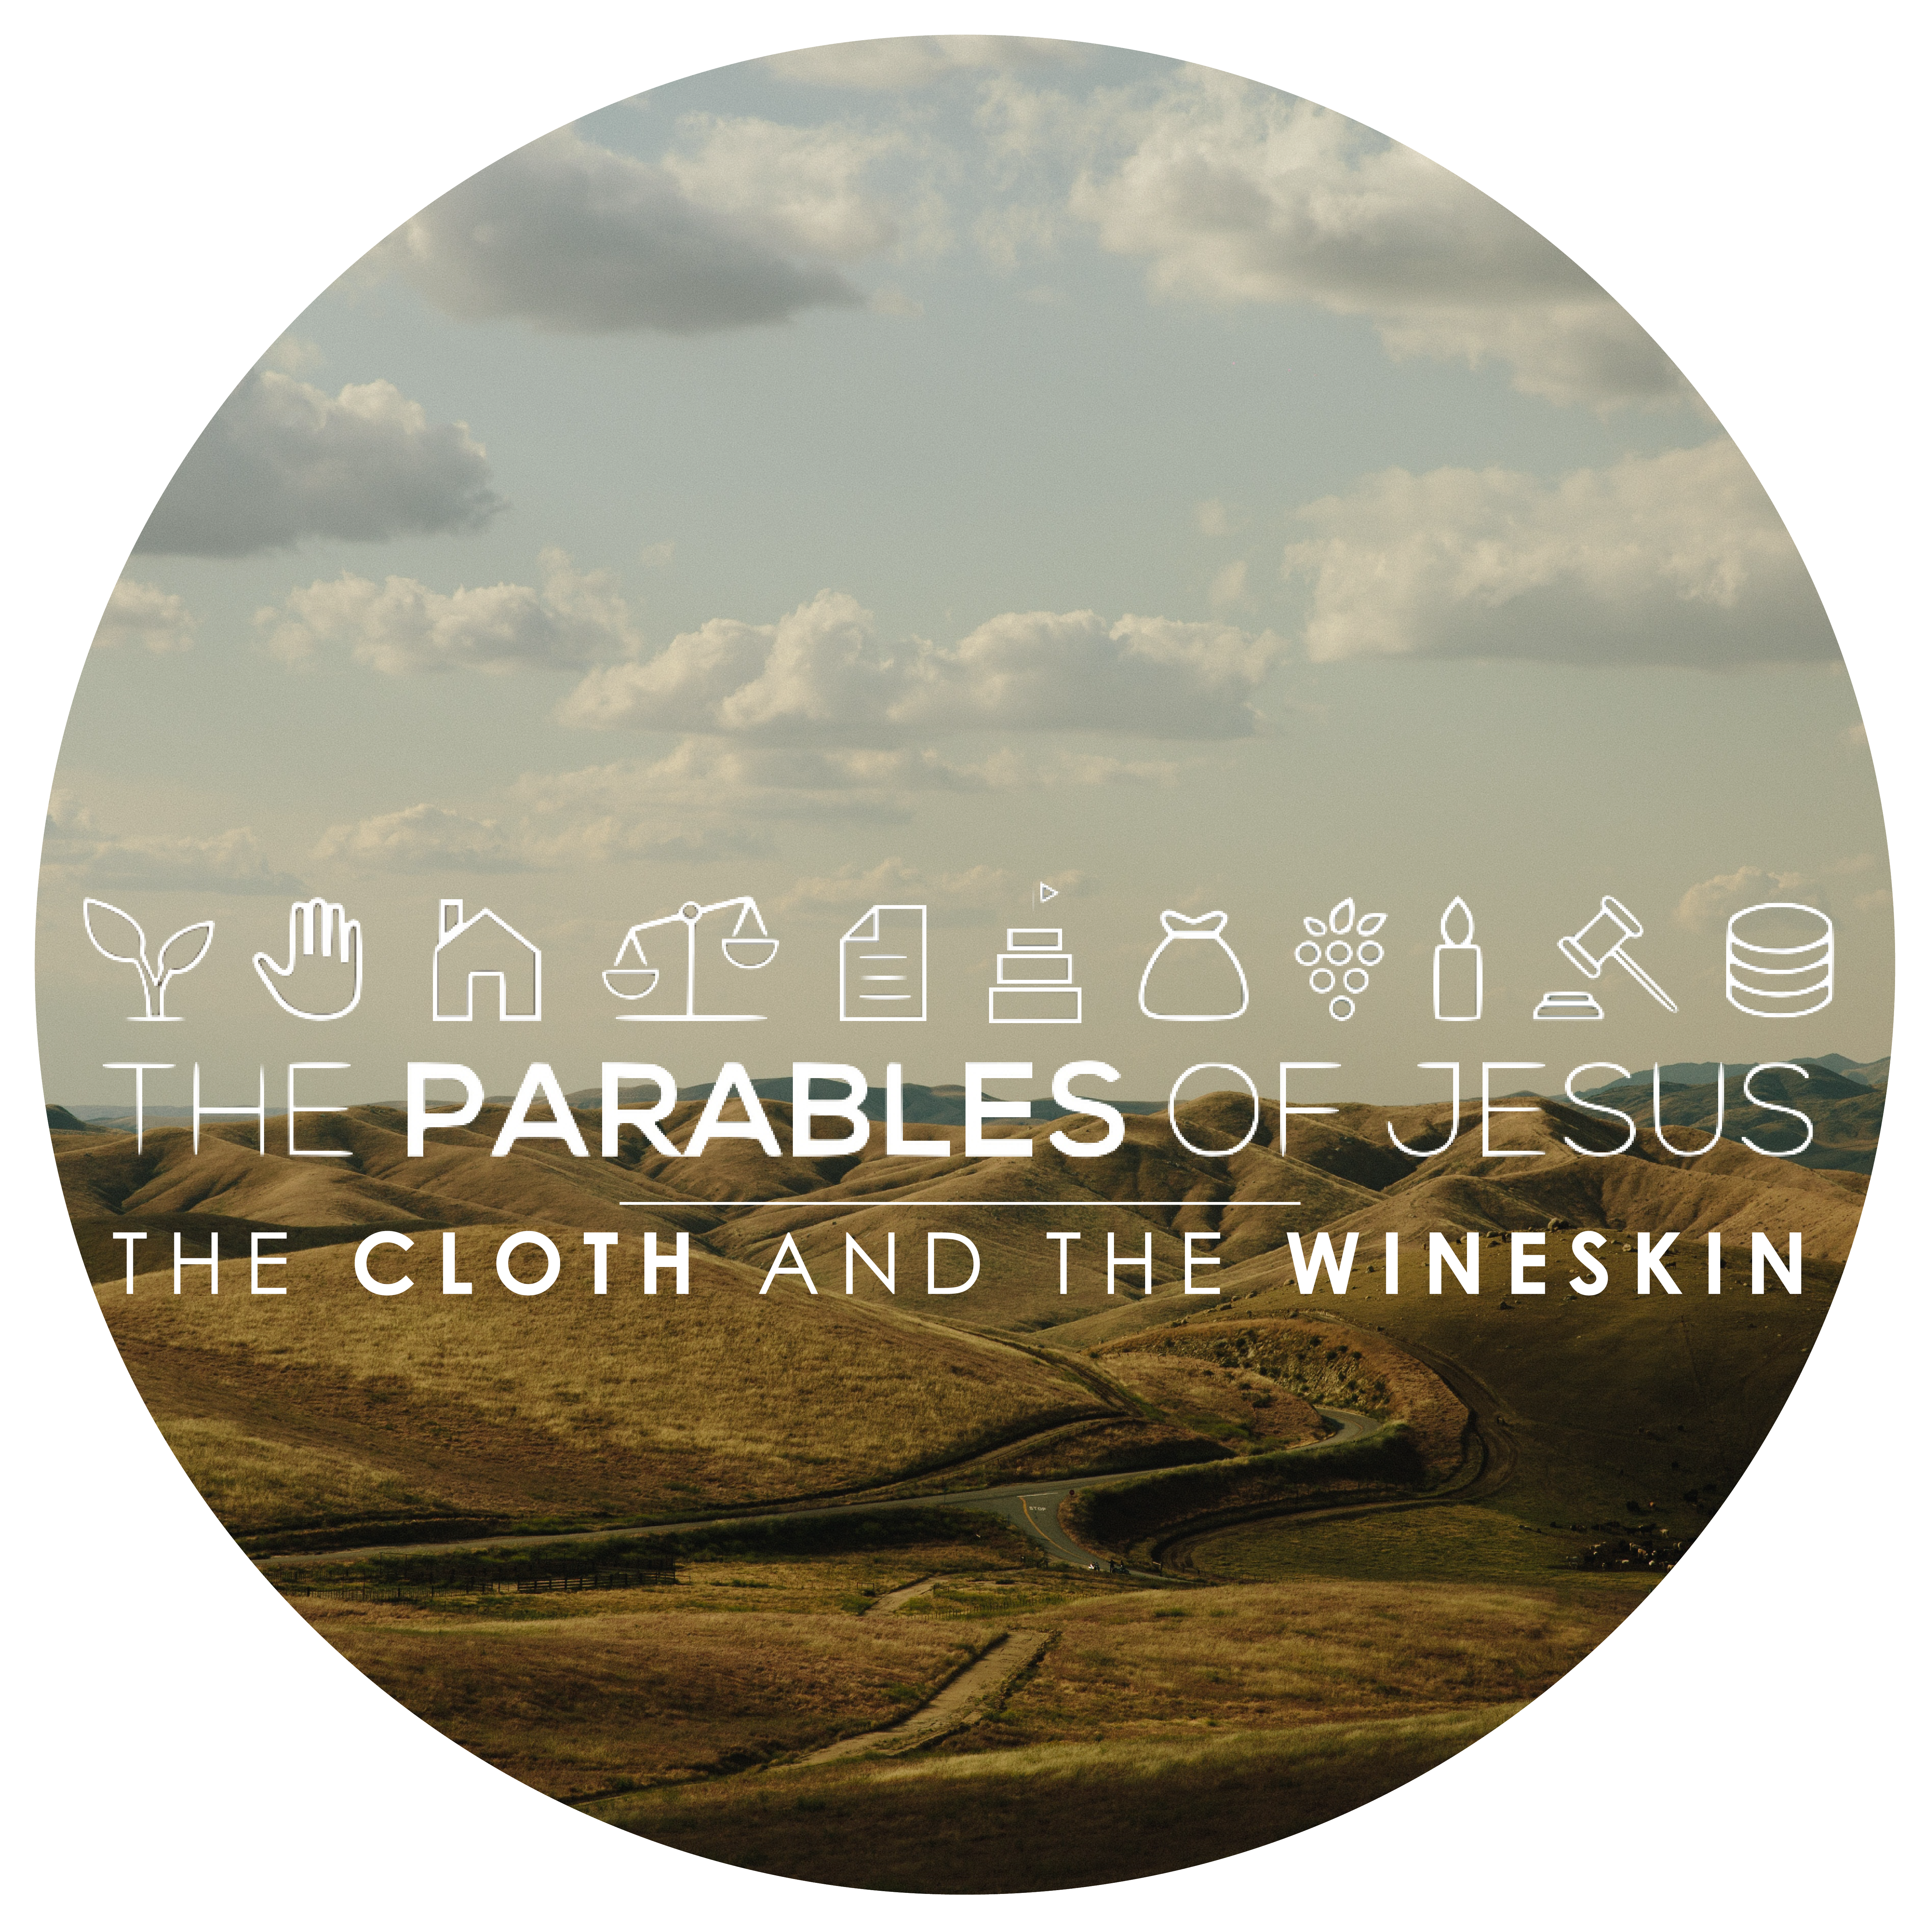 Parables Week 1: The Cloth and Wineskin